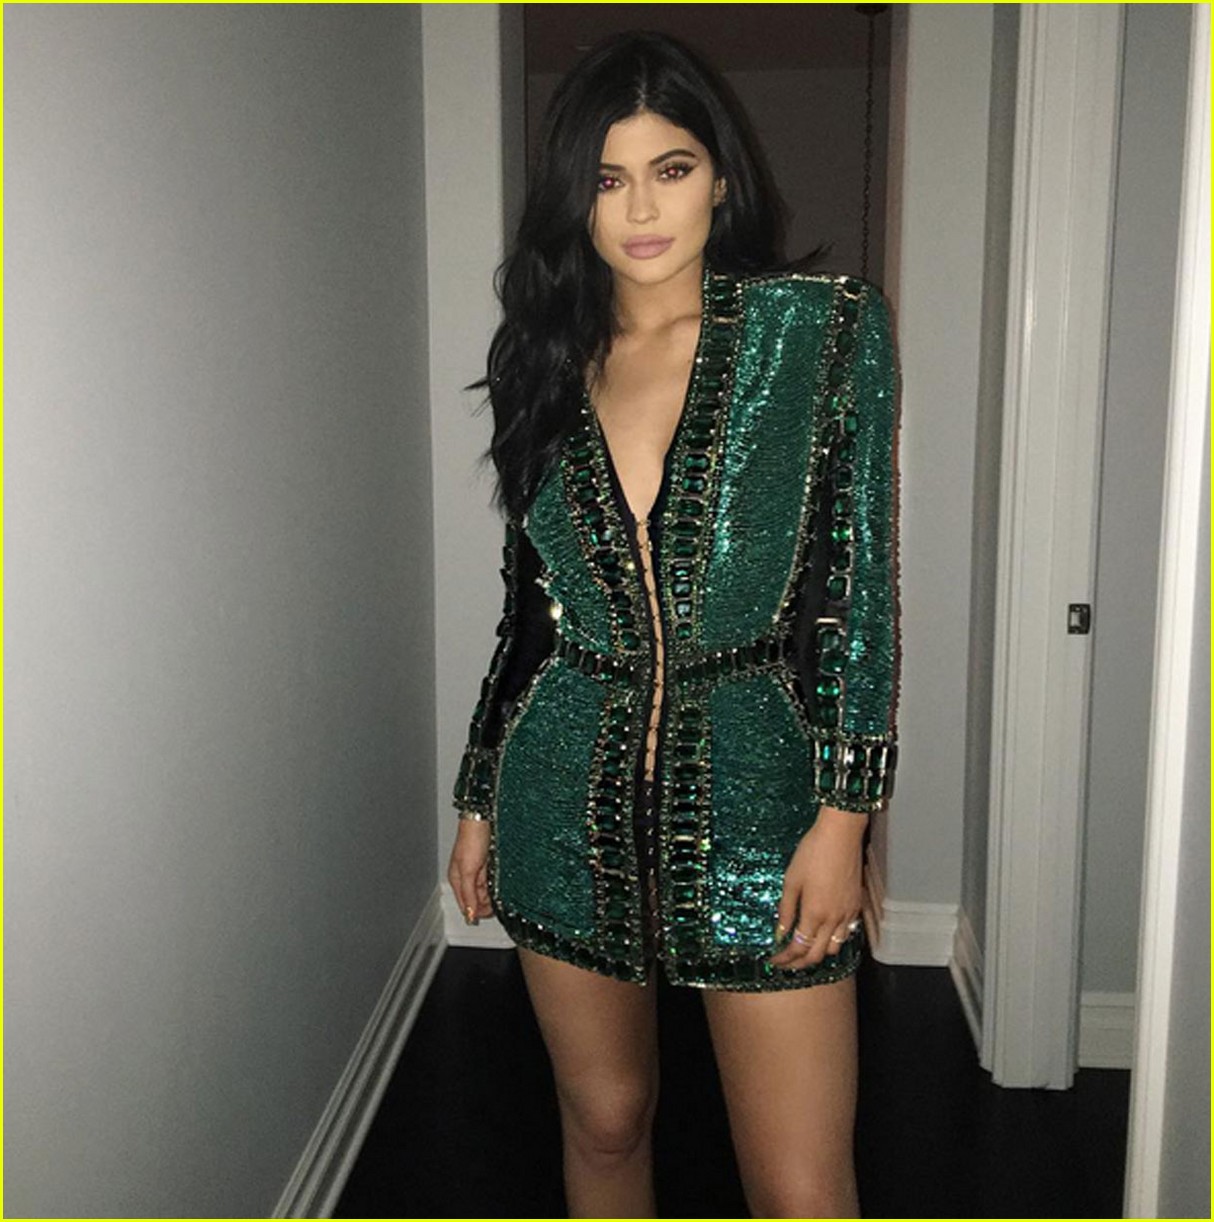 kylie jenner at 2015 kris christmas party 02